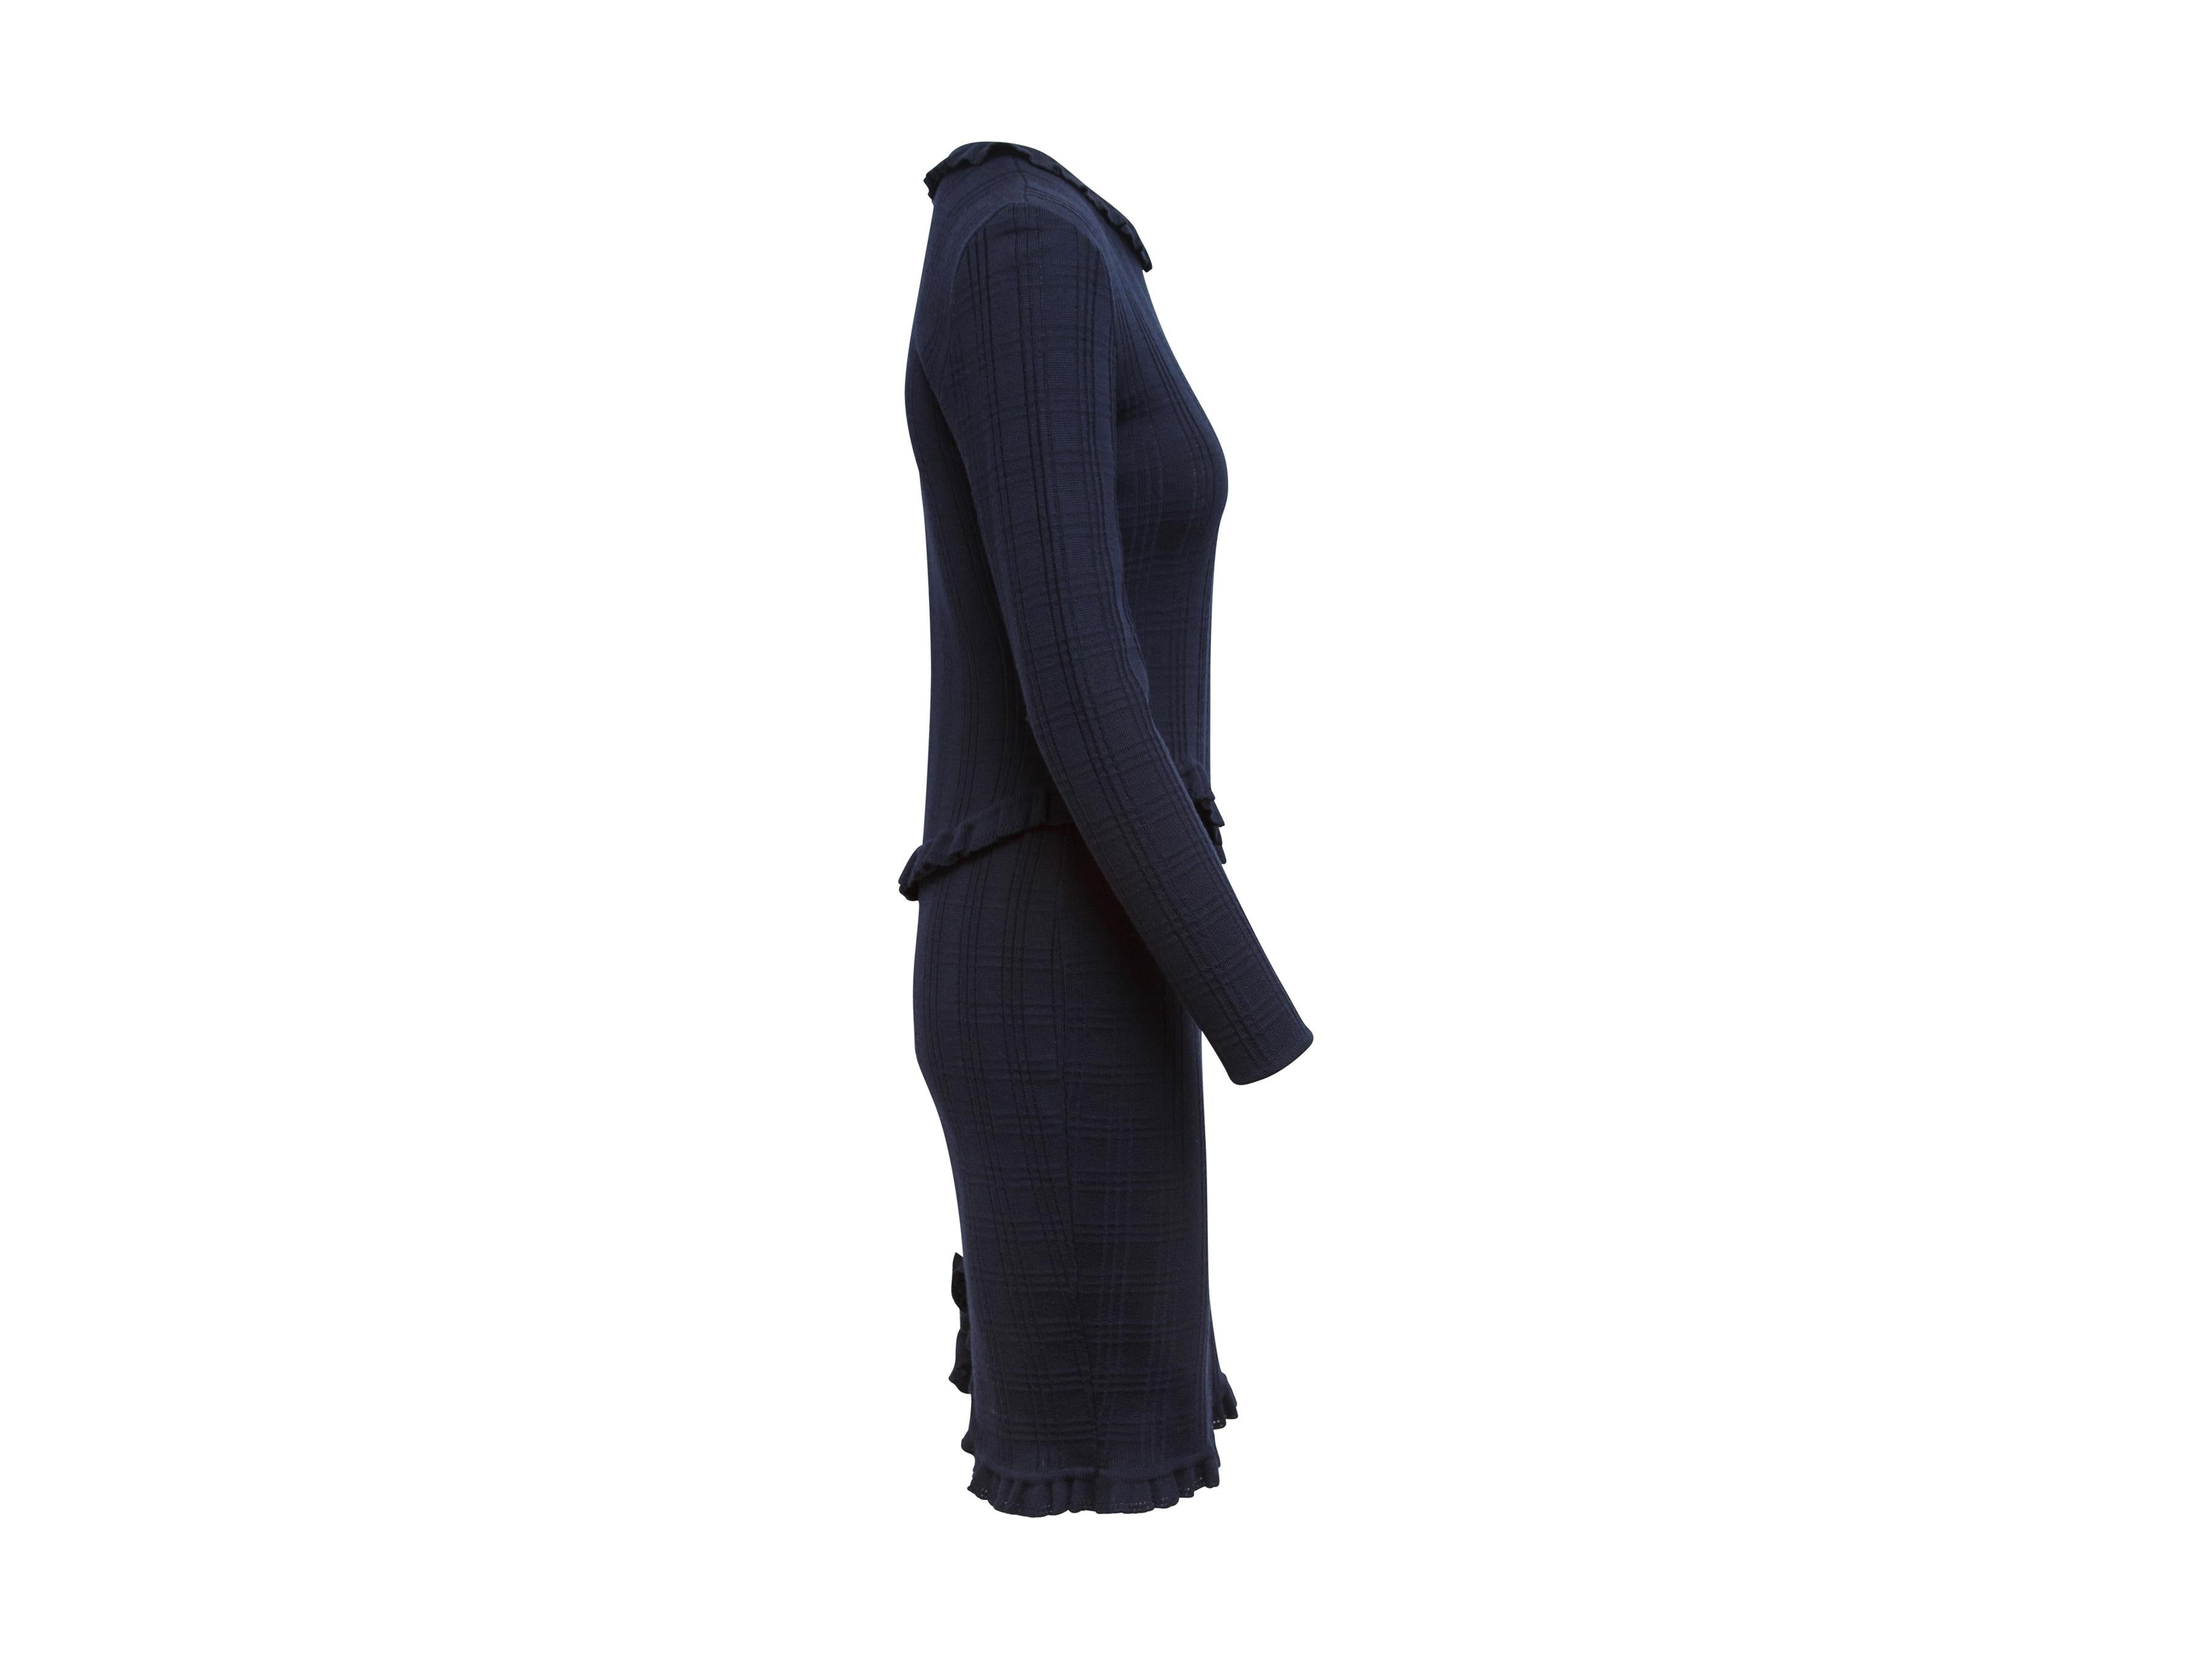 Product details:  Vintage navy blue knit midi dress by Givenchy Couture.  Accented with ruffles.  Roundneck.  Long sleeves.  Concealed back zip closure.  Bow accents back center hem.  35